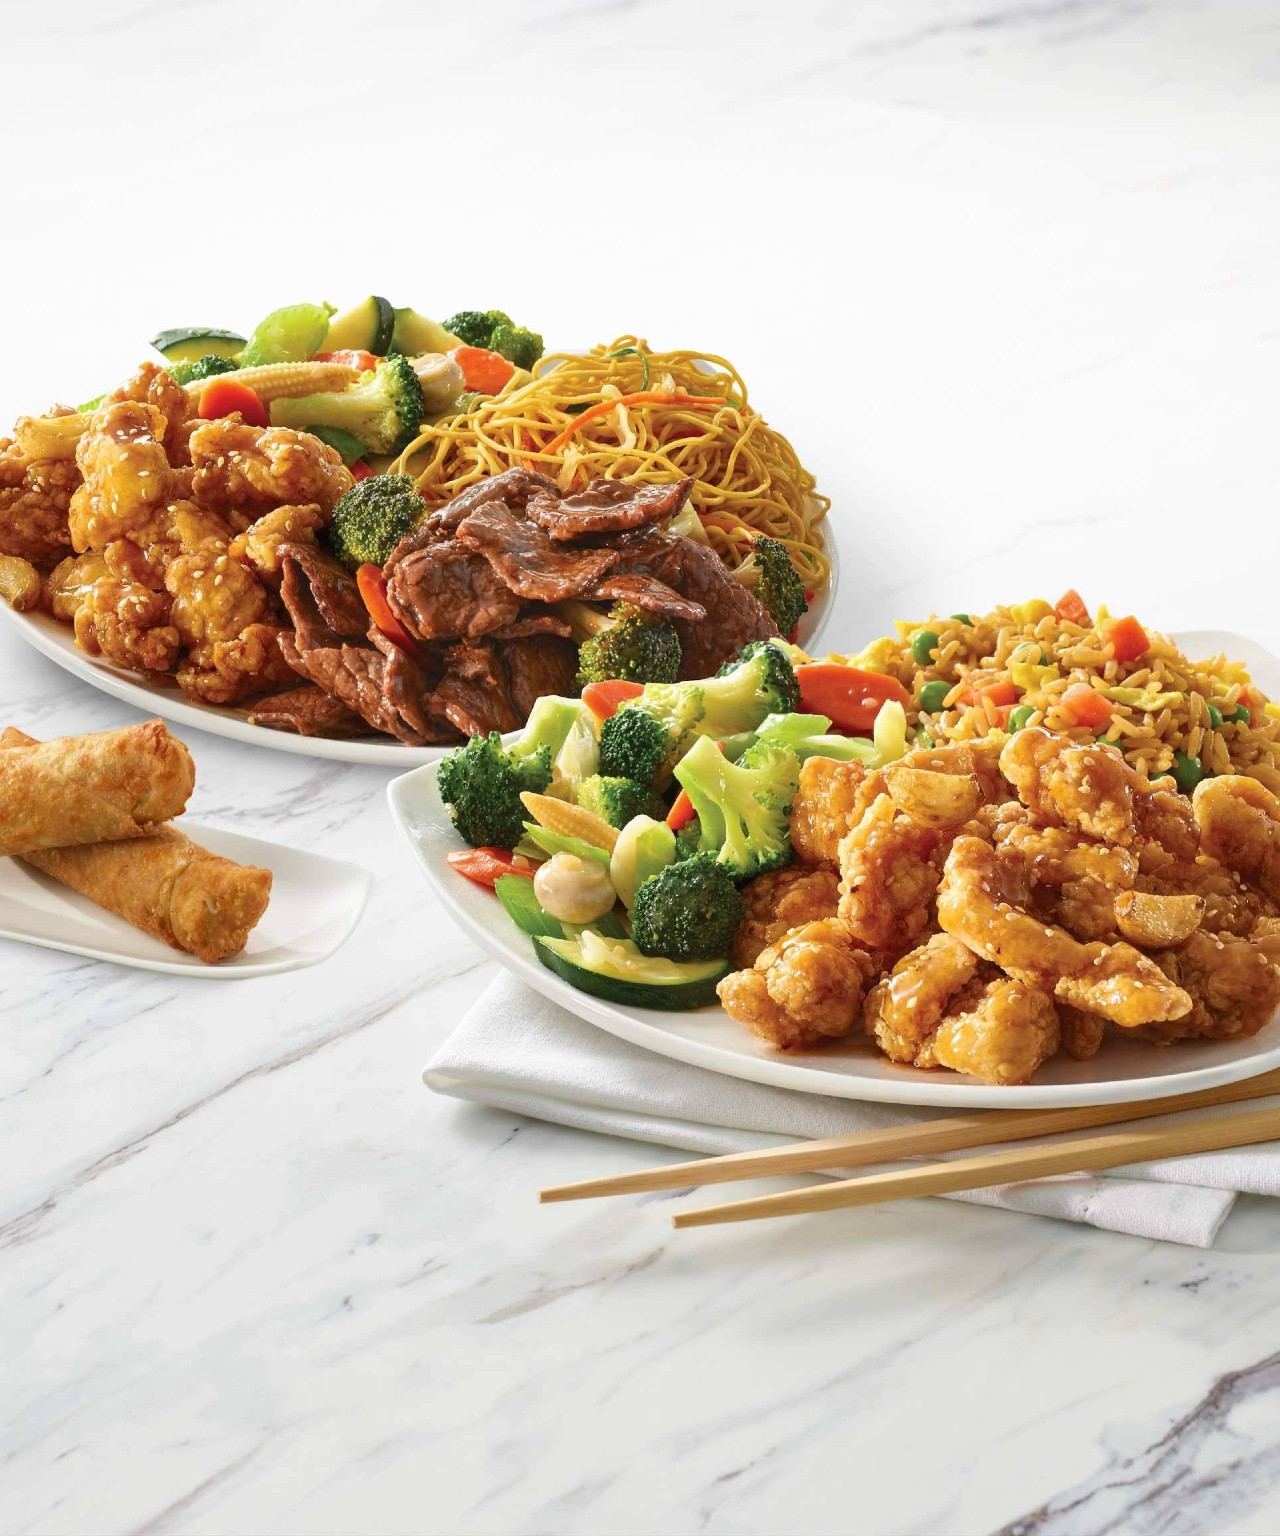 Image of two meal offerings from Manchu Wok presented on white tableware on a white marble table. One plate has noodles, fried chicken and stir fried vegetables, while the other has fried rice with vegetables and fried chicken.